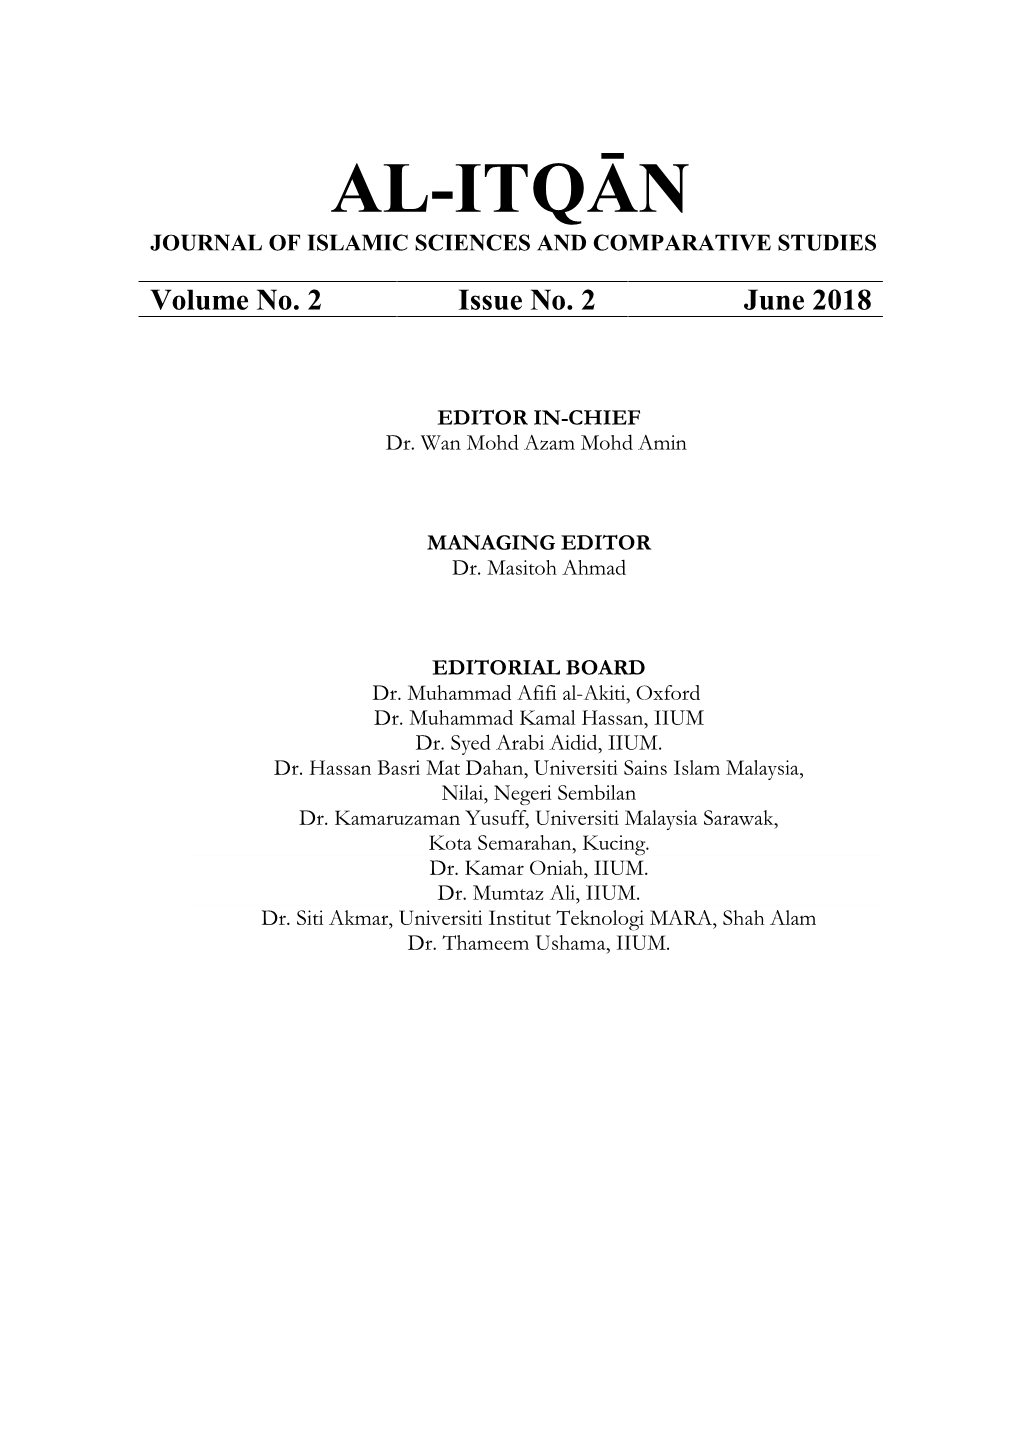 Al-Itqān Journal of Islamic Sciences and Comparative Studies